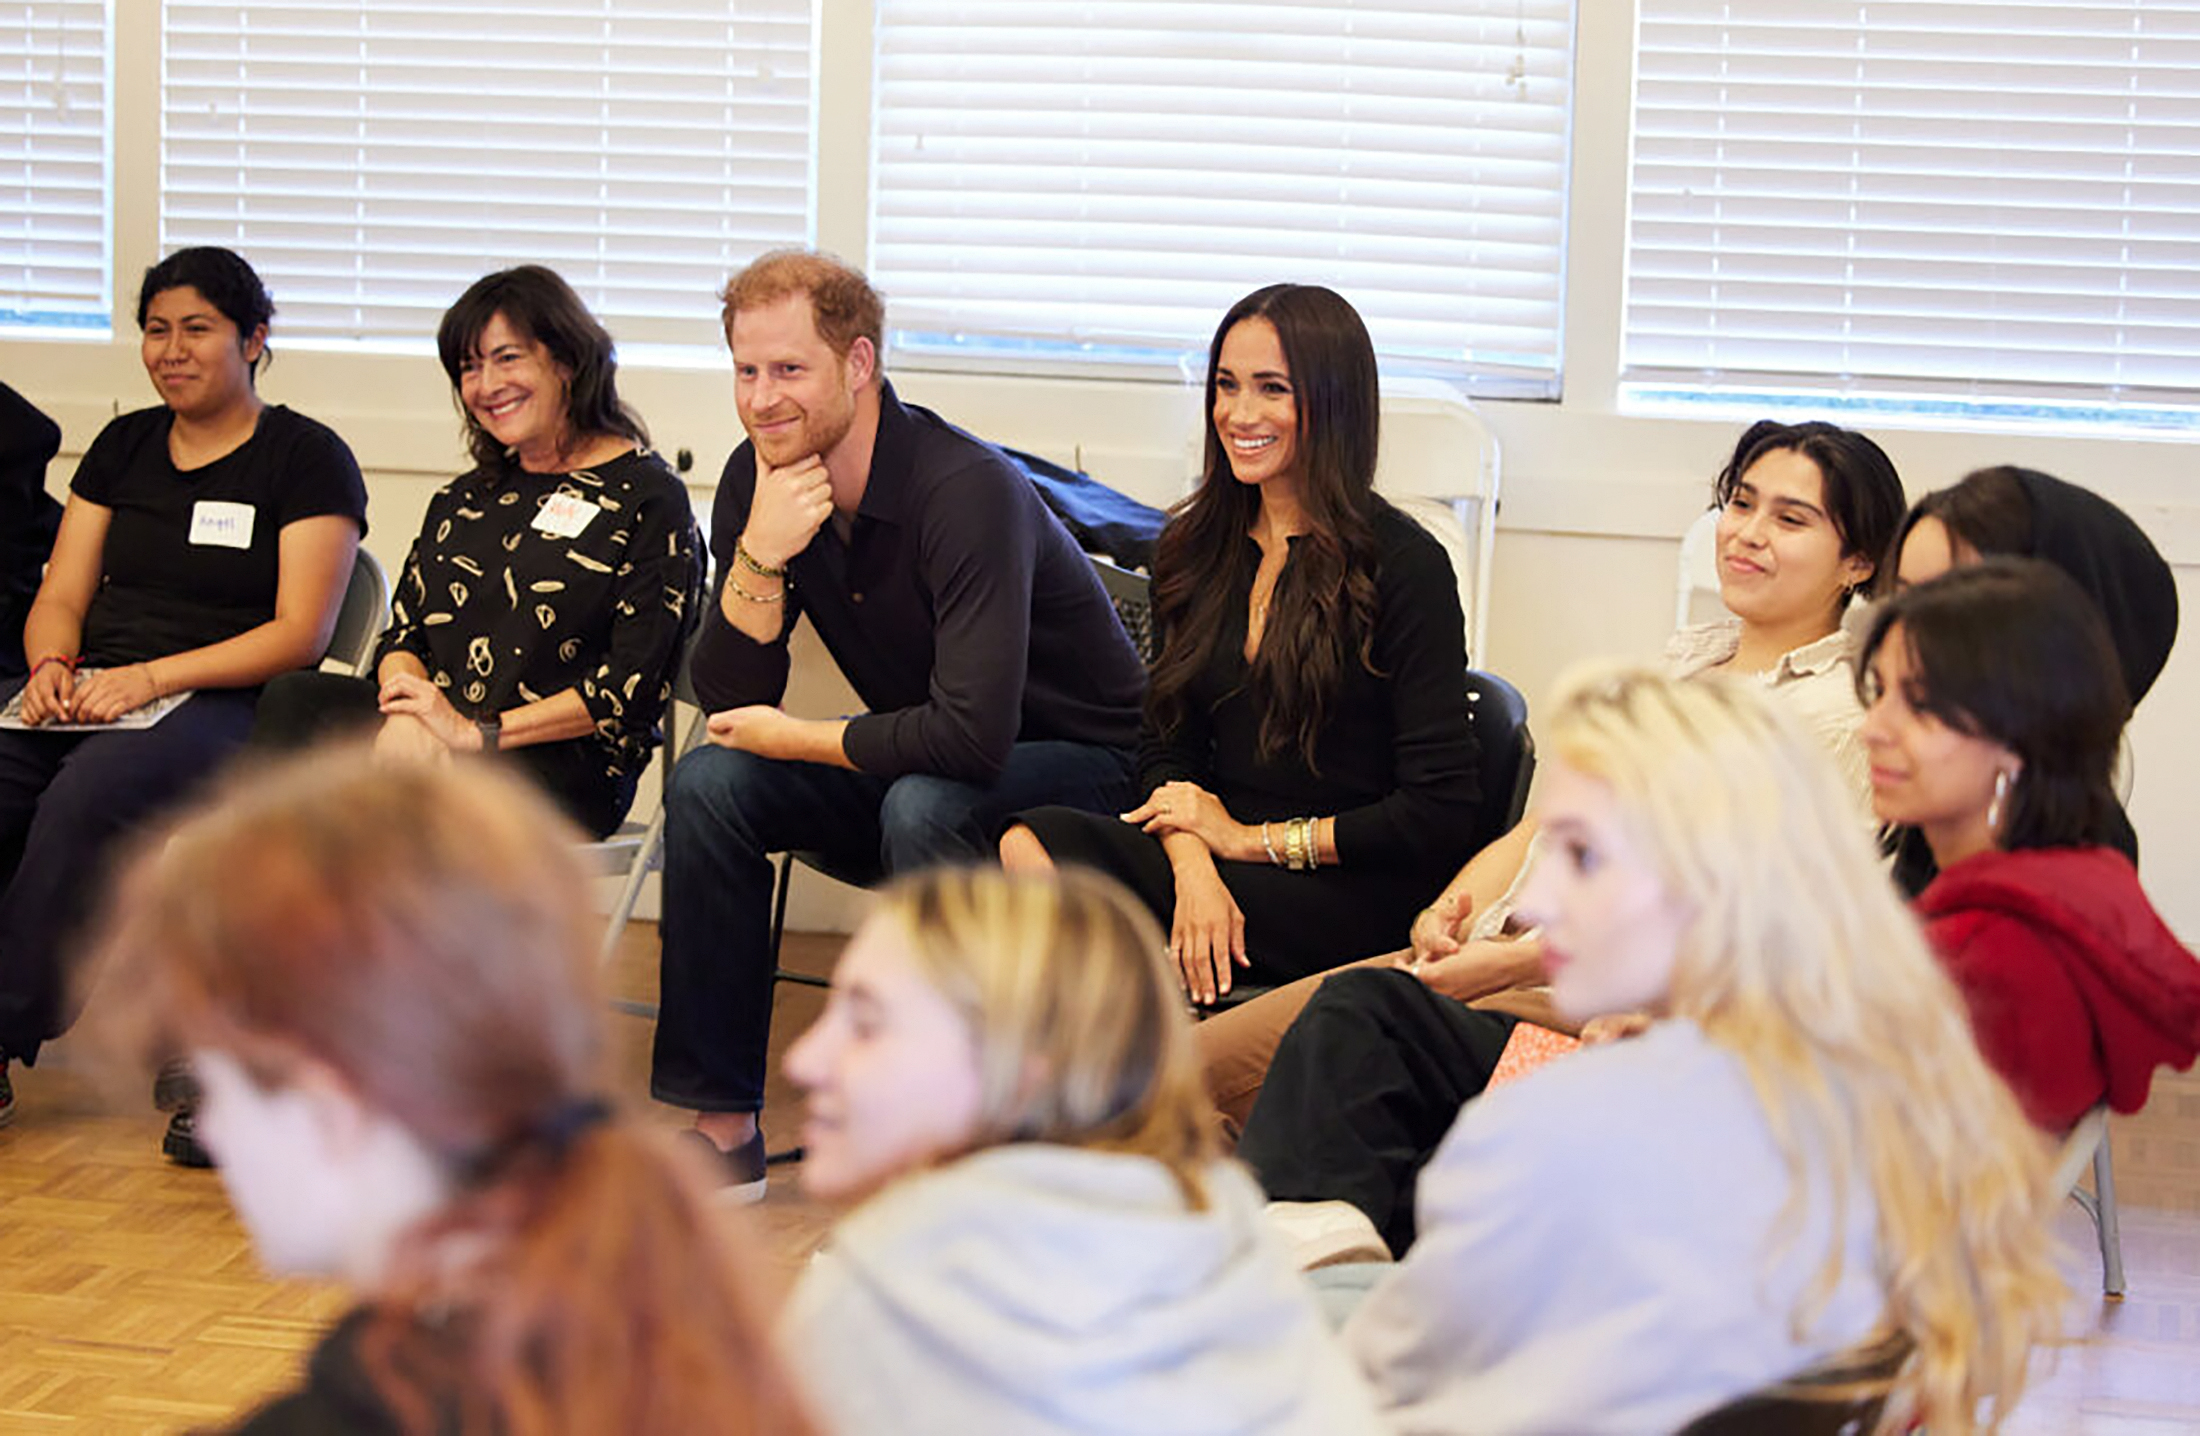 PHOTO: Prince Harry and Meghan, the Duke and Duchess of Sussex, meet with teens from AHA! Santa Barbara, a youth group, to discuss mental health.